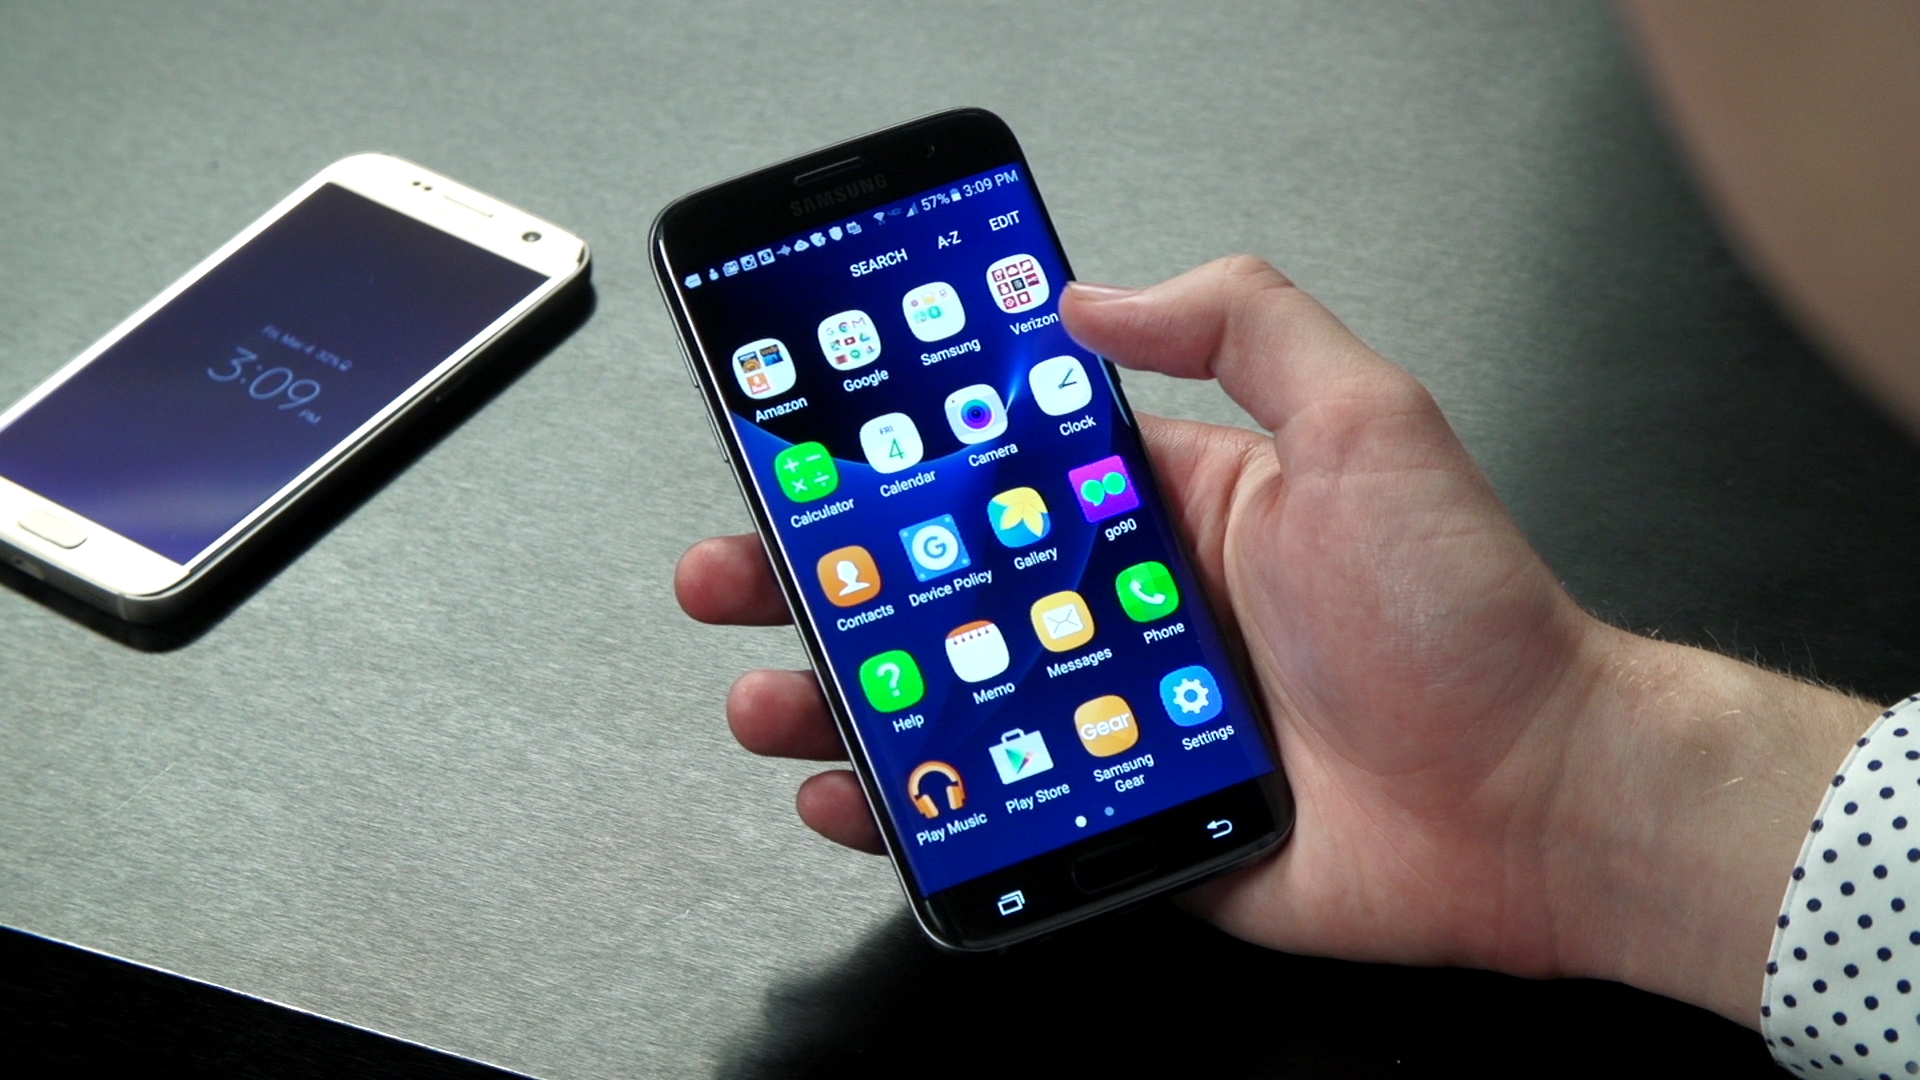 Review: Samsung's Galaxy S7 and S7 edge are the phones we've craved |  TechCrunch